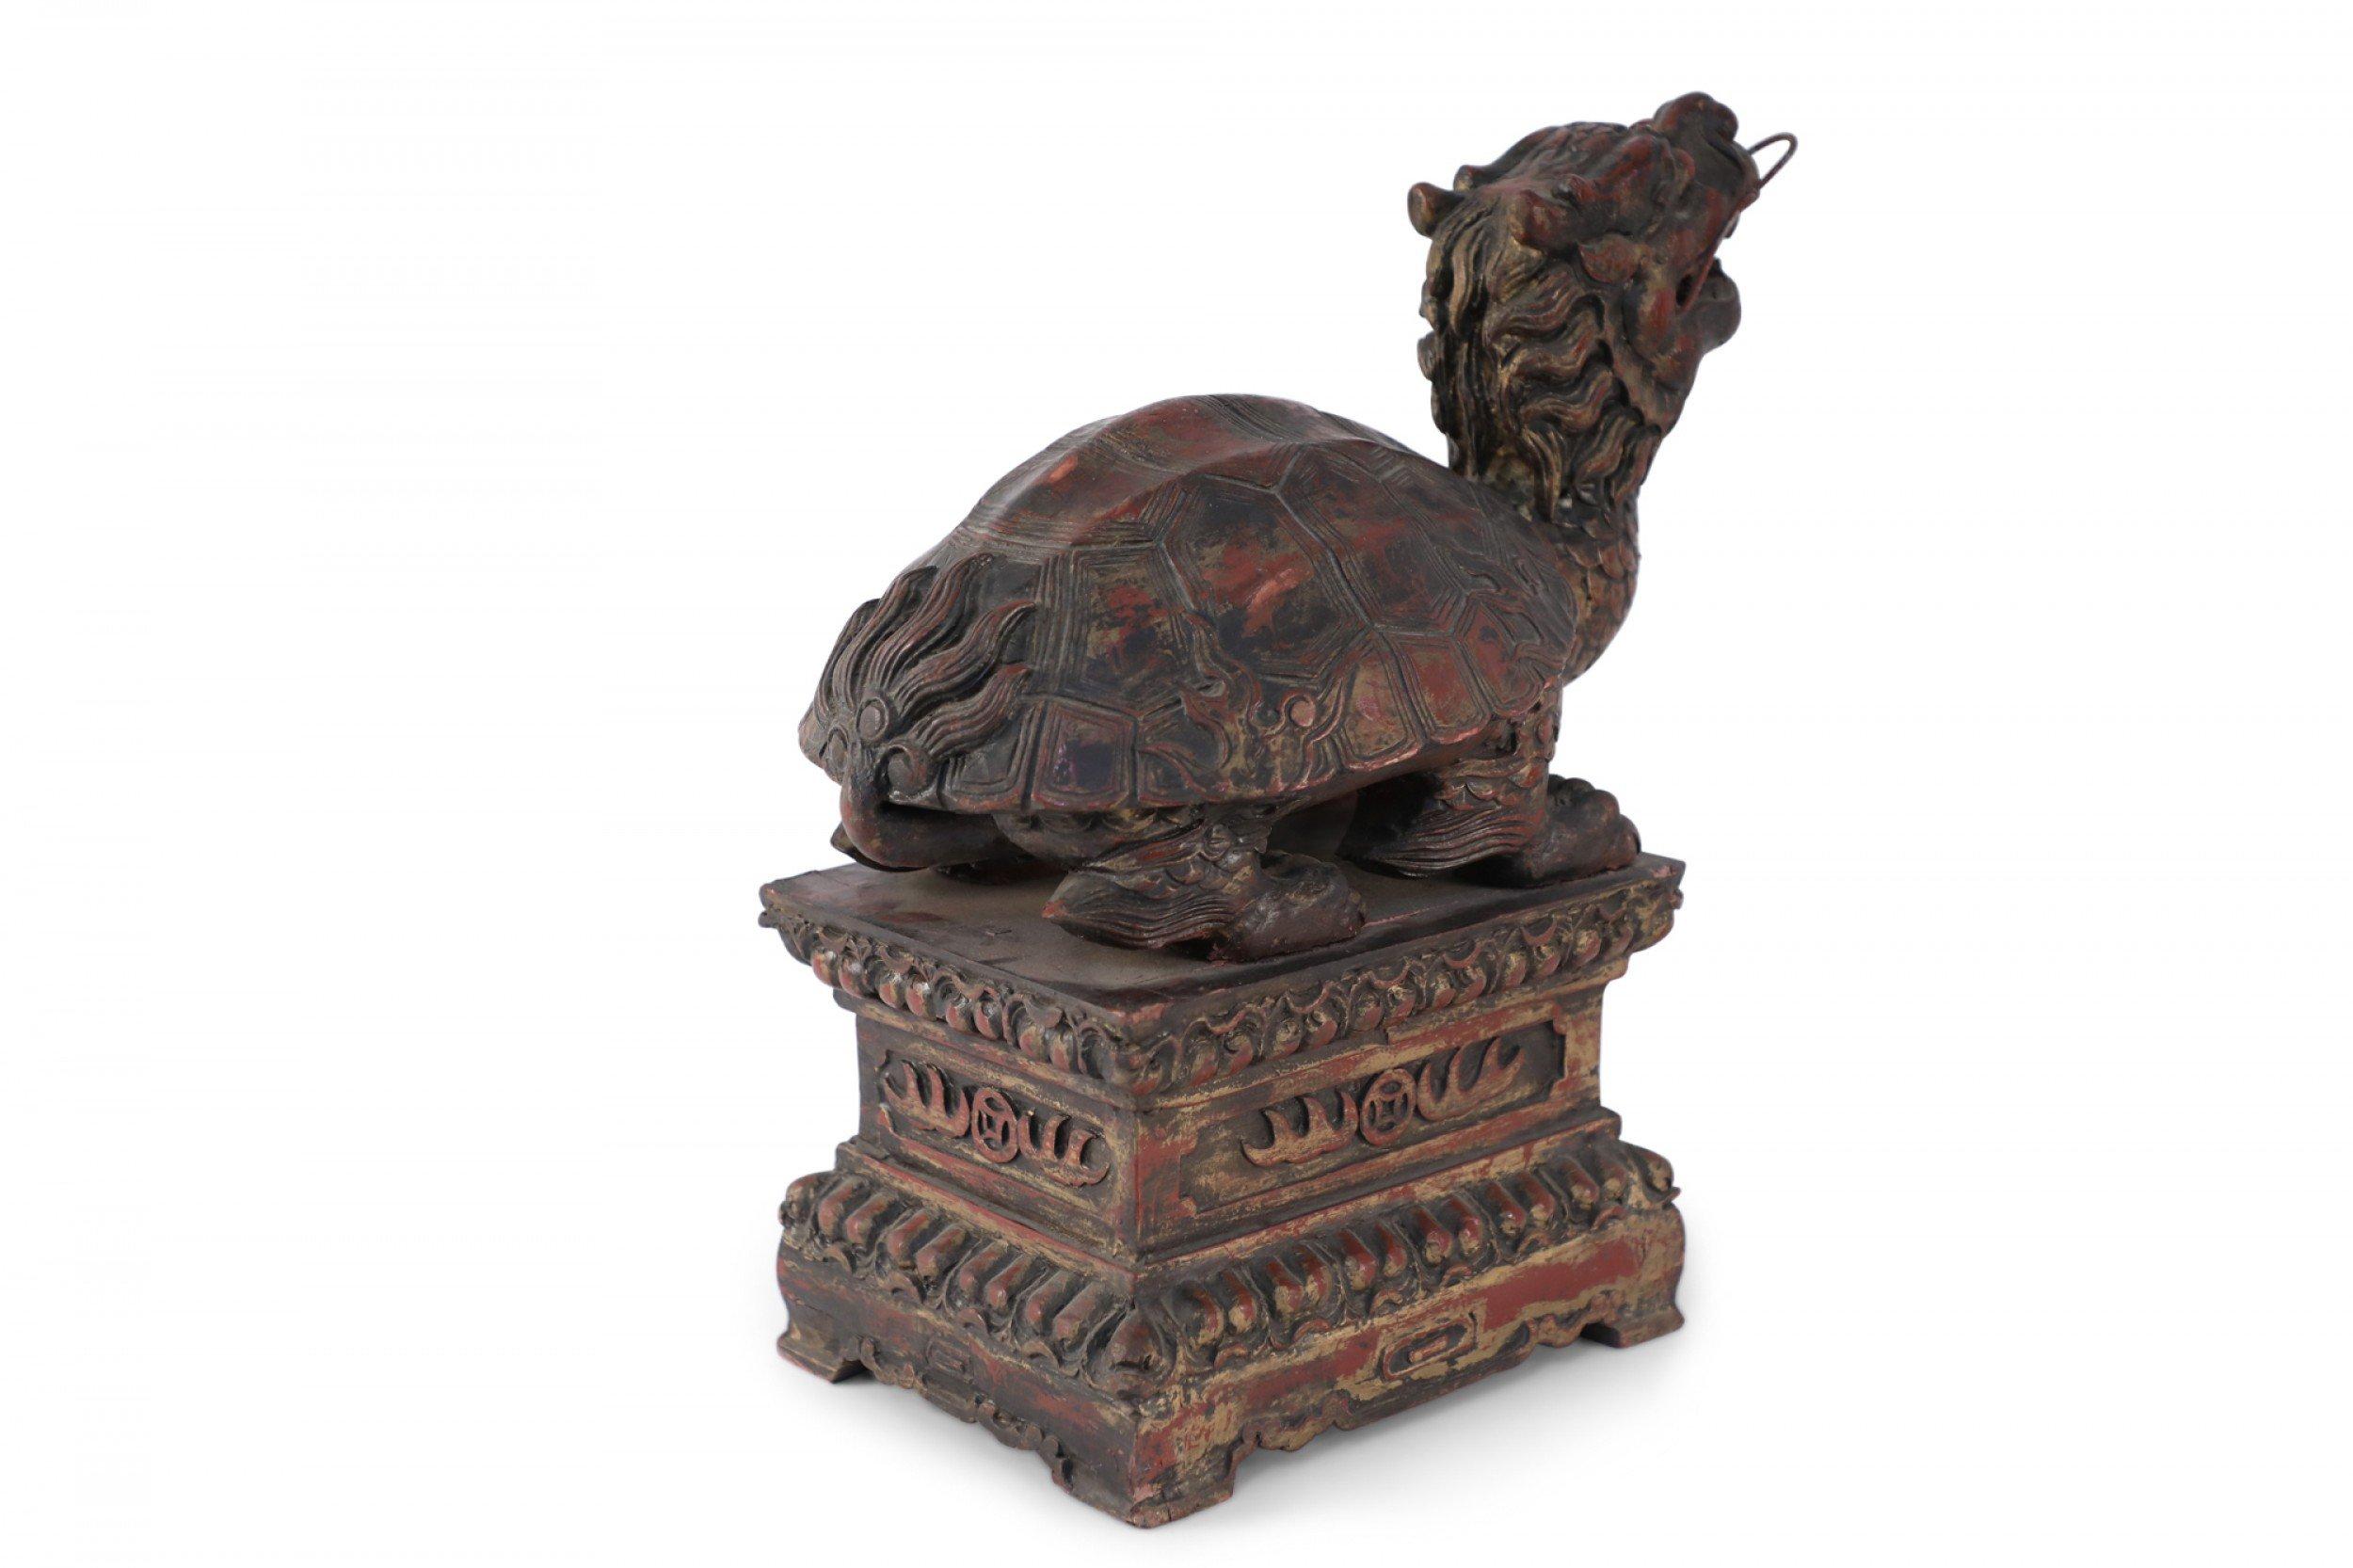 Chinese Export Antique Chinese Carved Wooden Longgui Dragon Turtle Sculpture For Sale